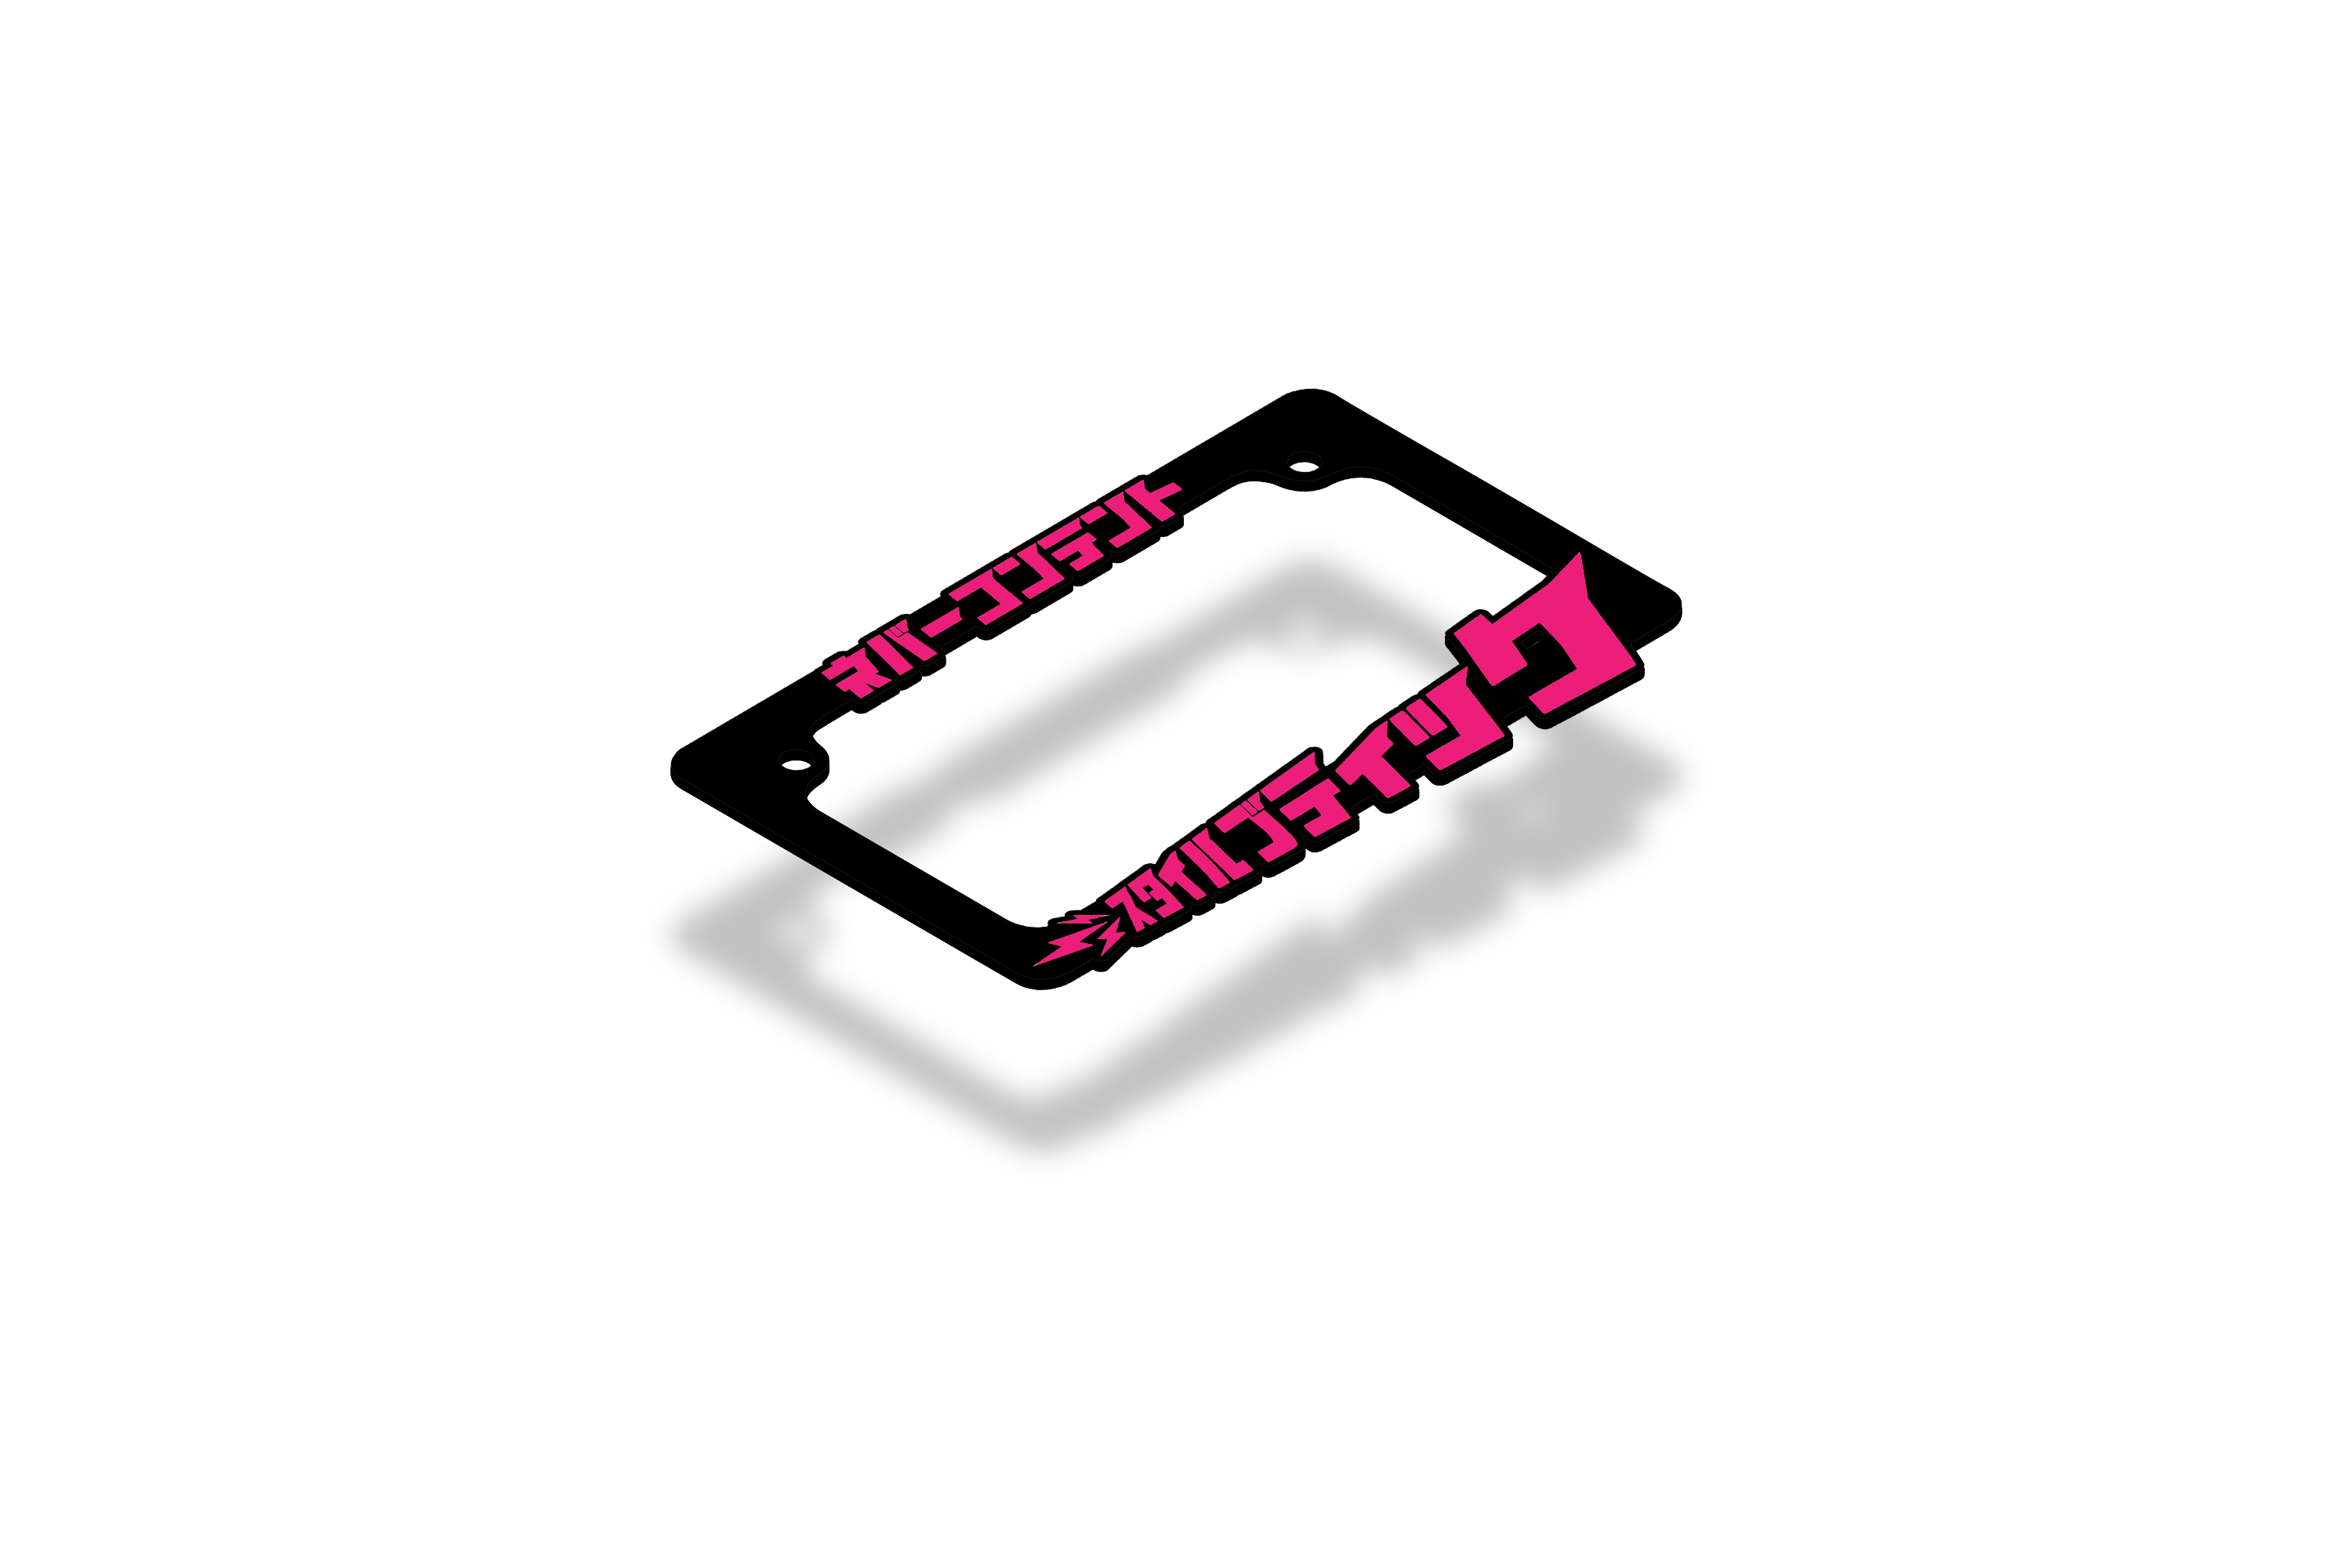 Style Boutique - Scooter / Motorcycle Plate Frame (LUMINOUS PINK TEXT)